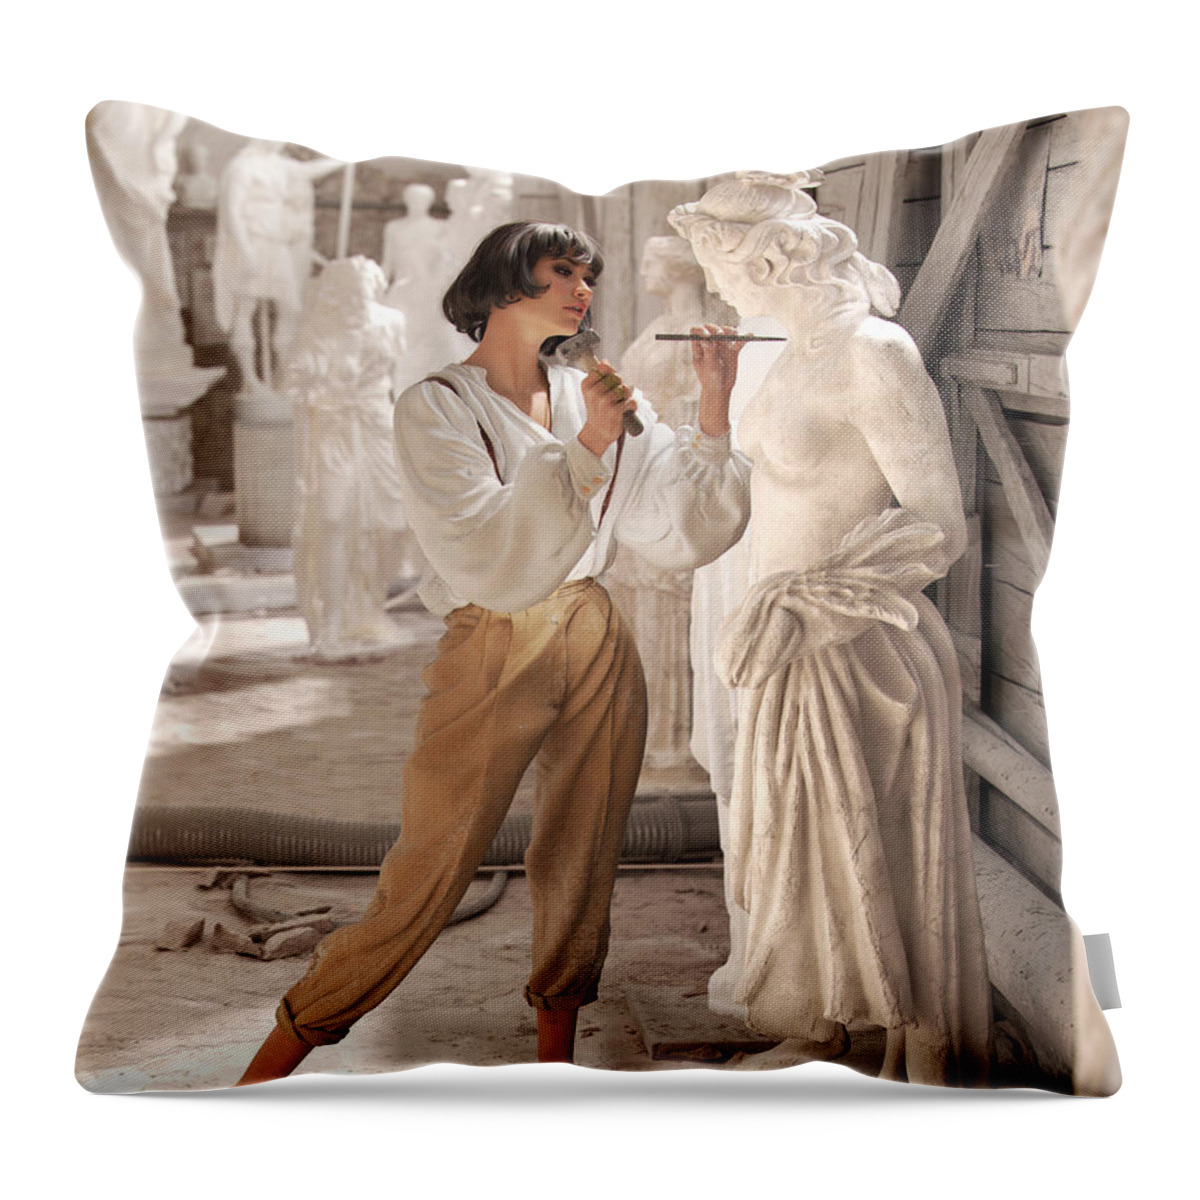 The Muse Pillow